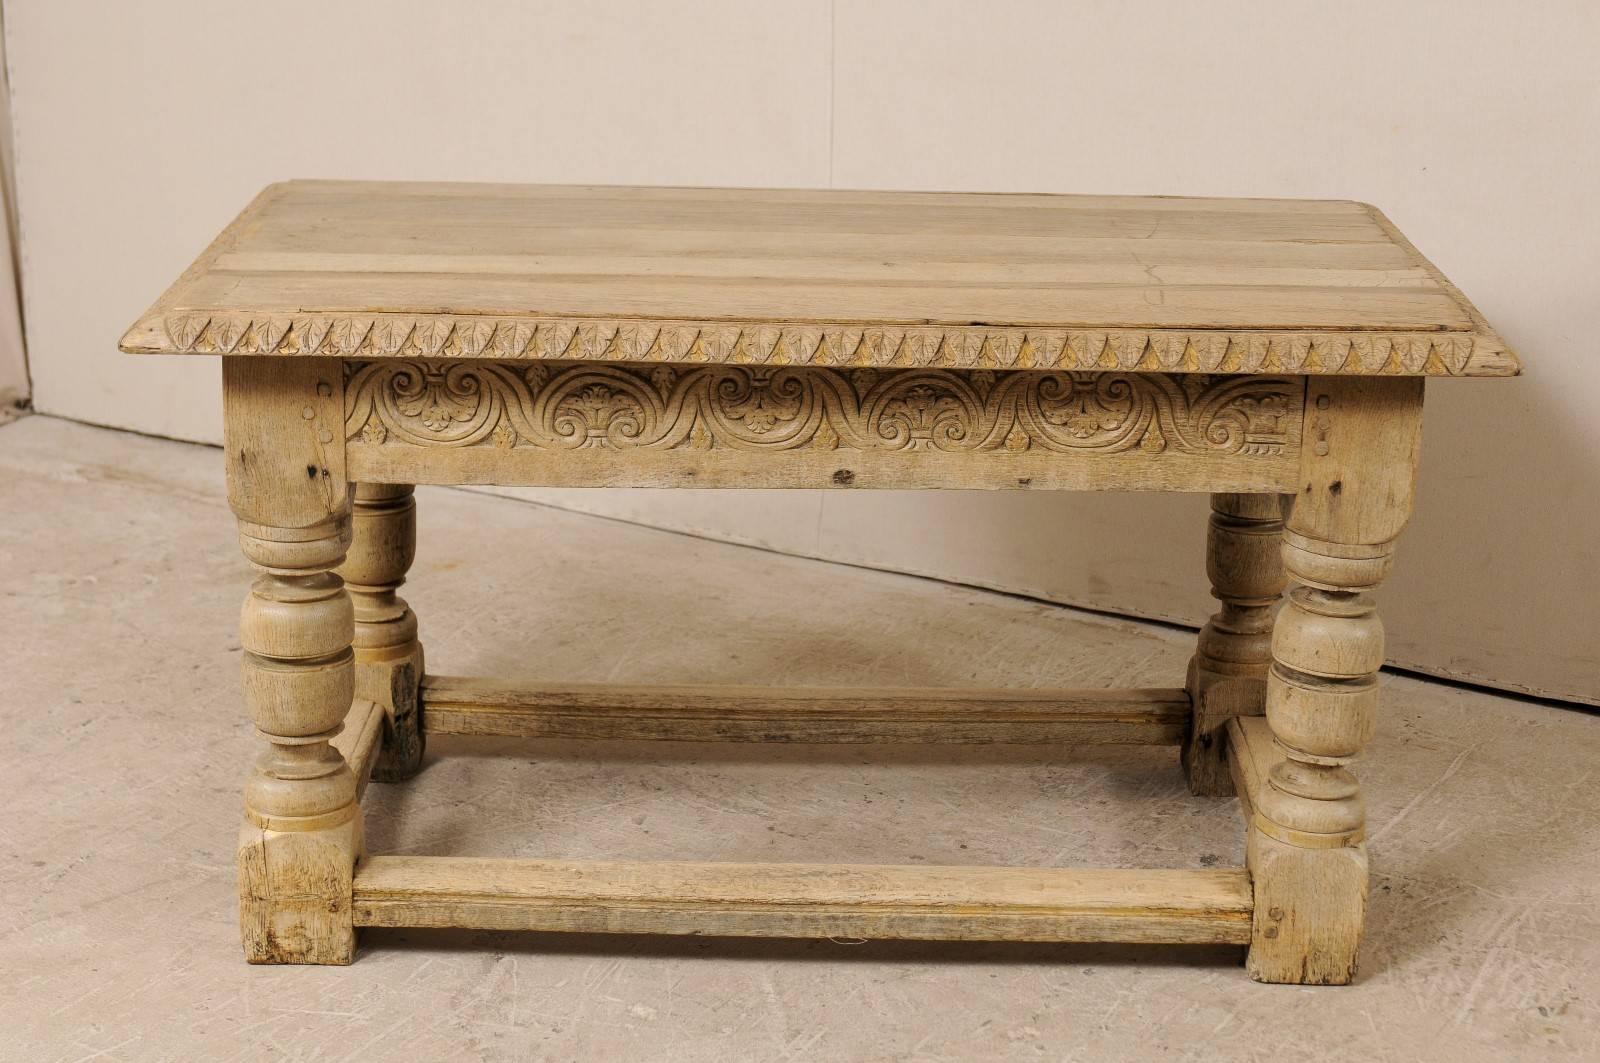 19th Century French 19th C. Table w/ Robust Baluster Legs & Nicely Carved and Adorn Apron